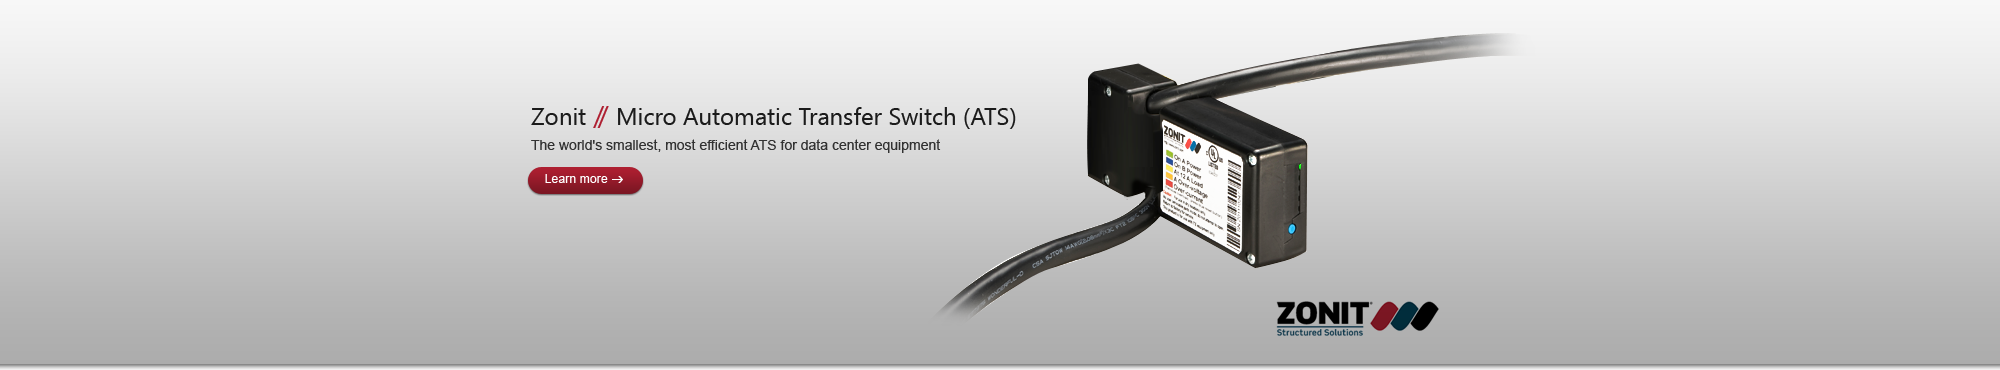 Zonit Micro Automatic Transfer Switch